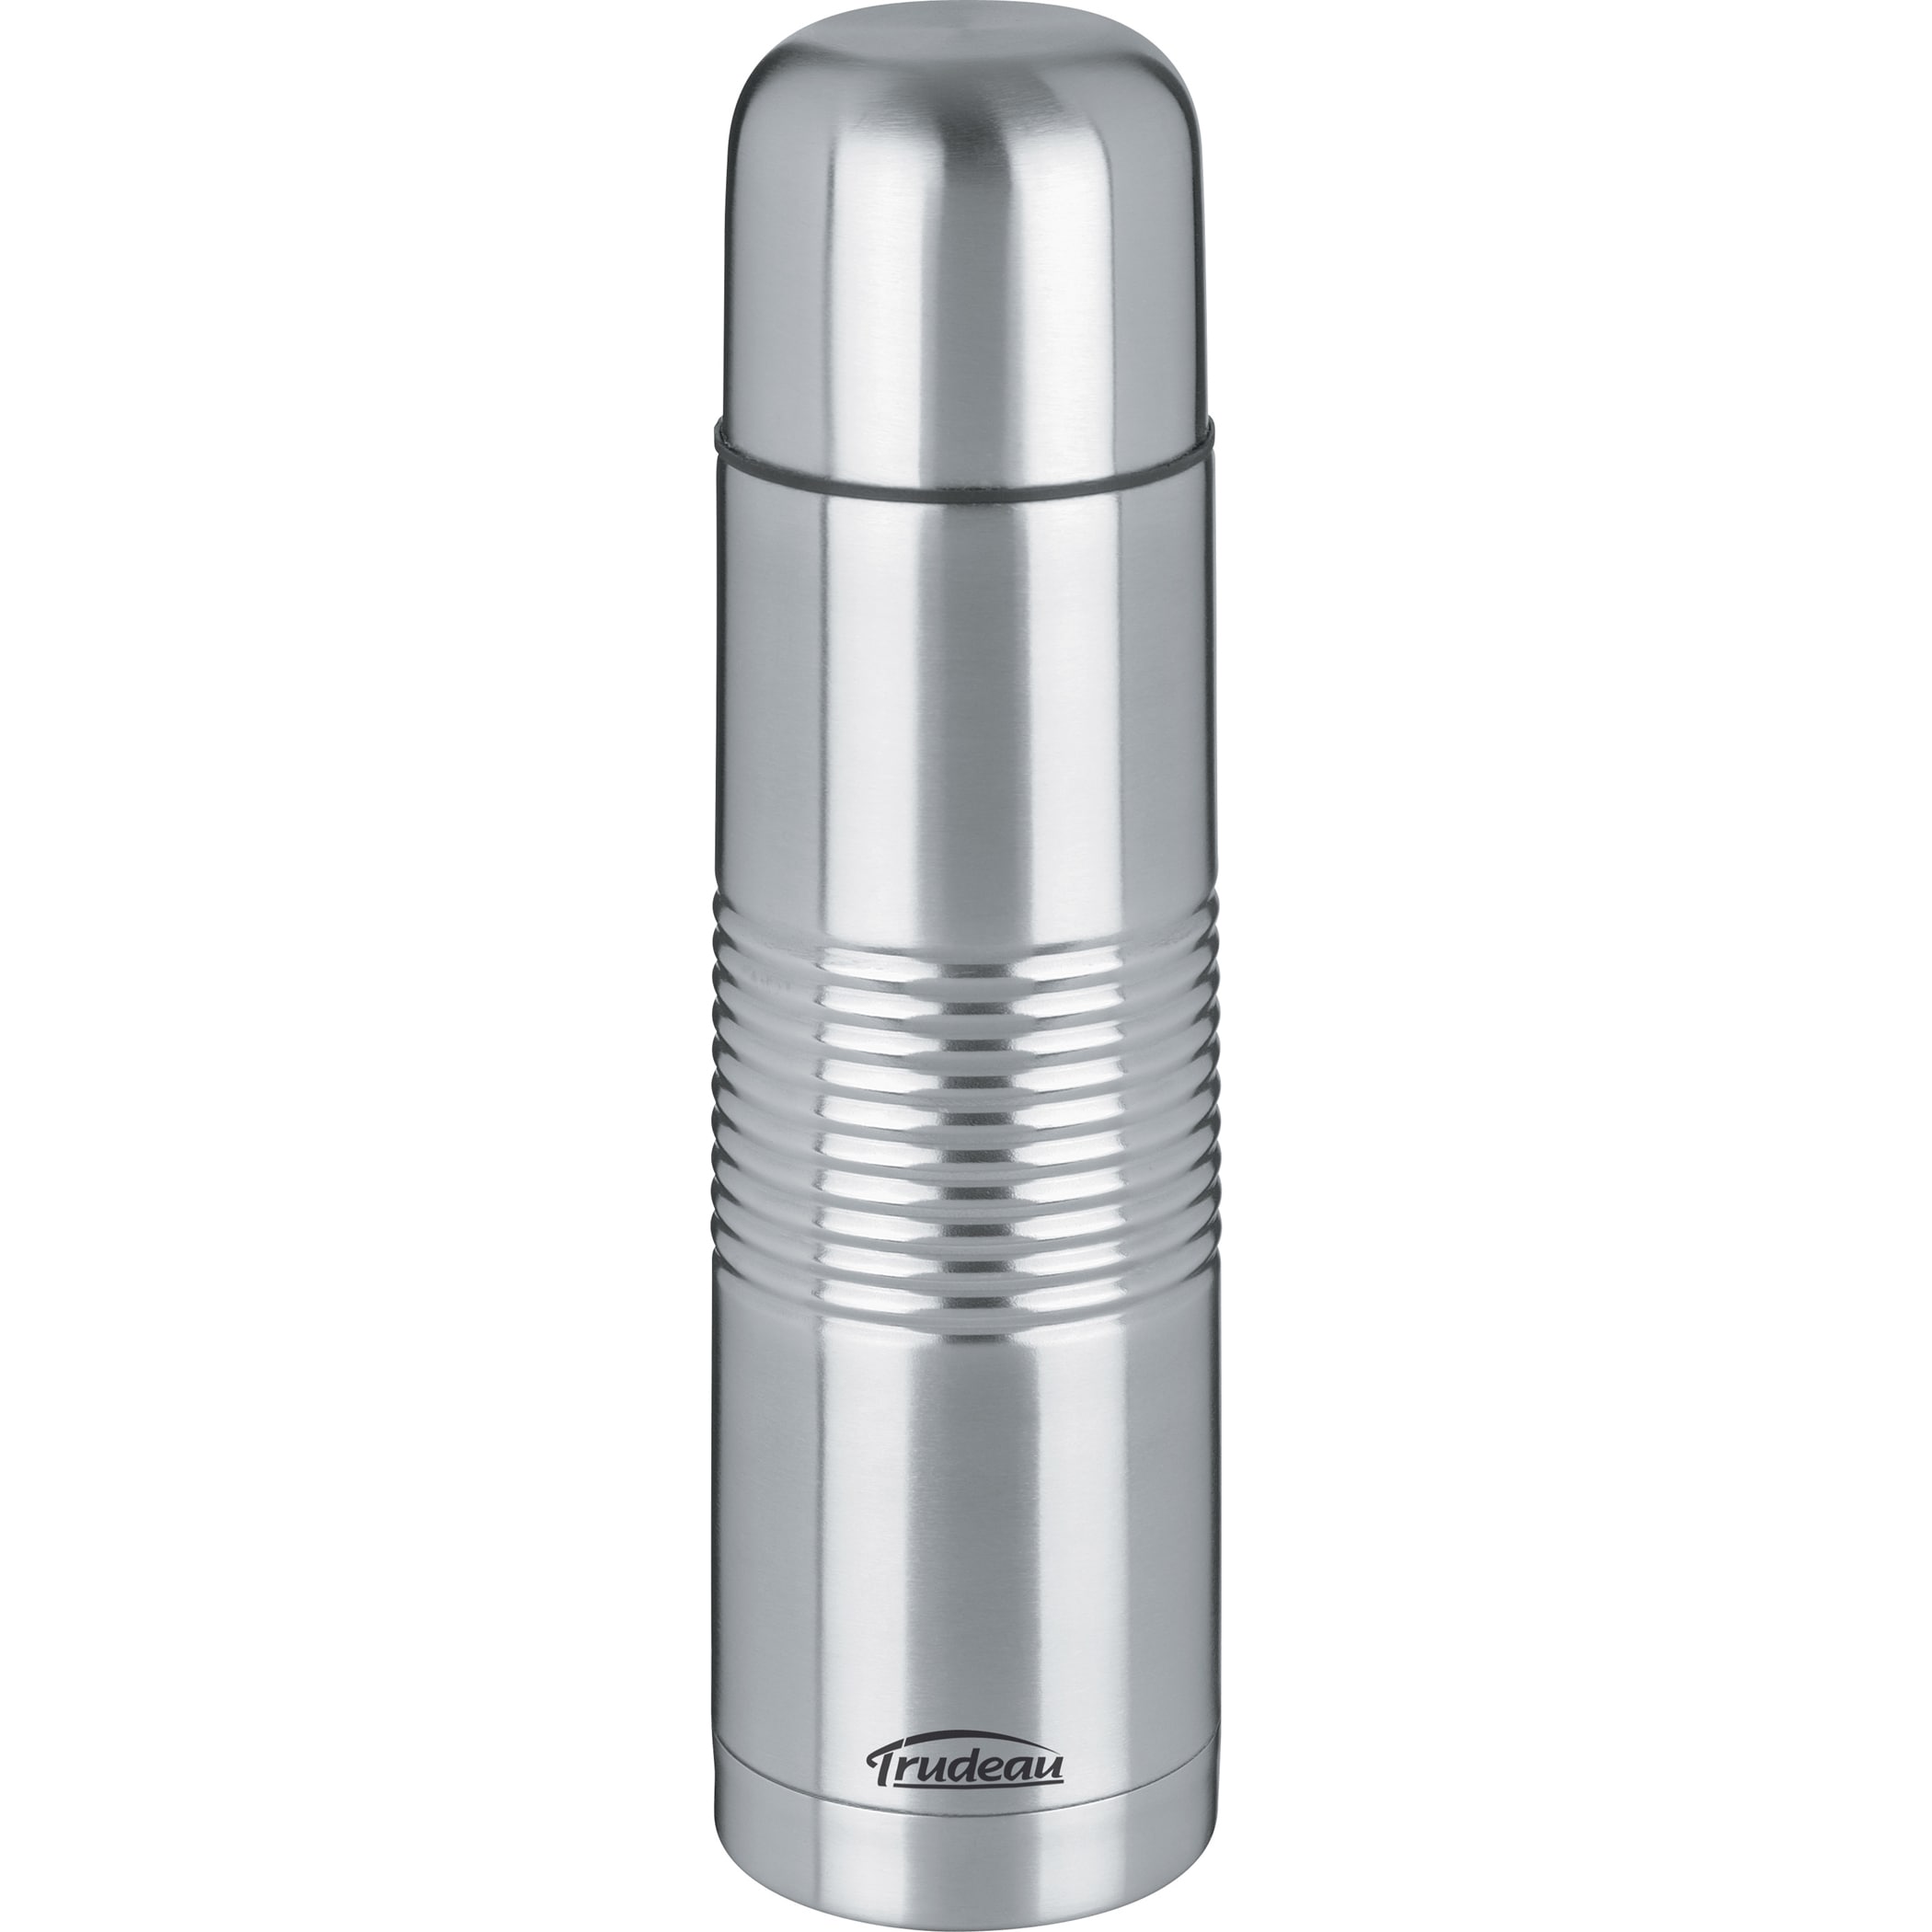 https://ak1.ostkcdn.com/images/products/13154853/Trudeau-04715600-16-Oz-Stainless-Steel-Vacuum-Insulated-Bottle-acd2a5f0-c306-4265-b0ea-6e541b320ec1.jpg